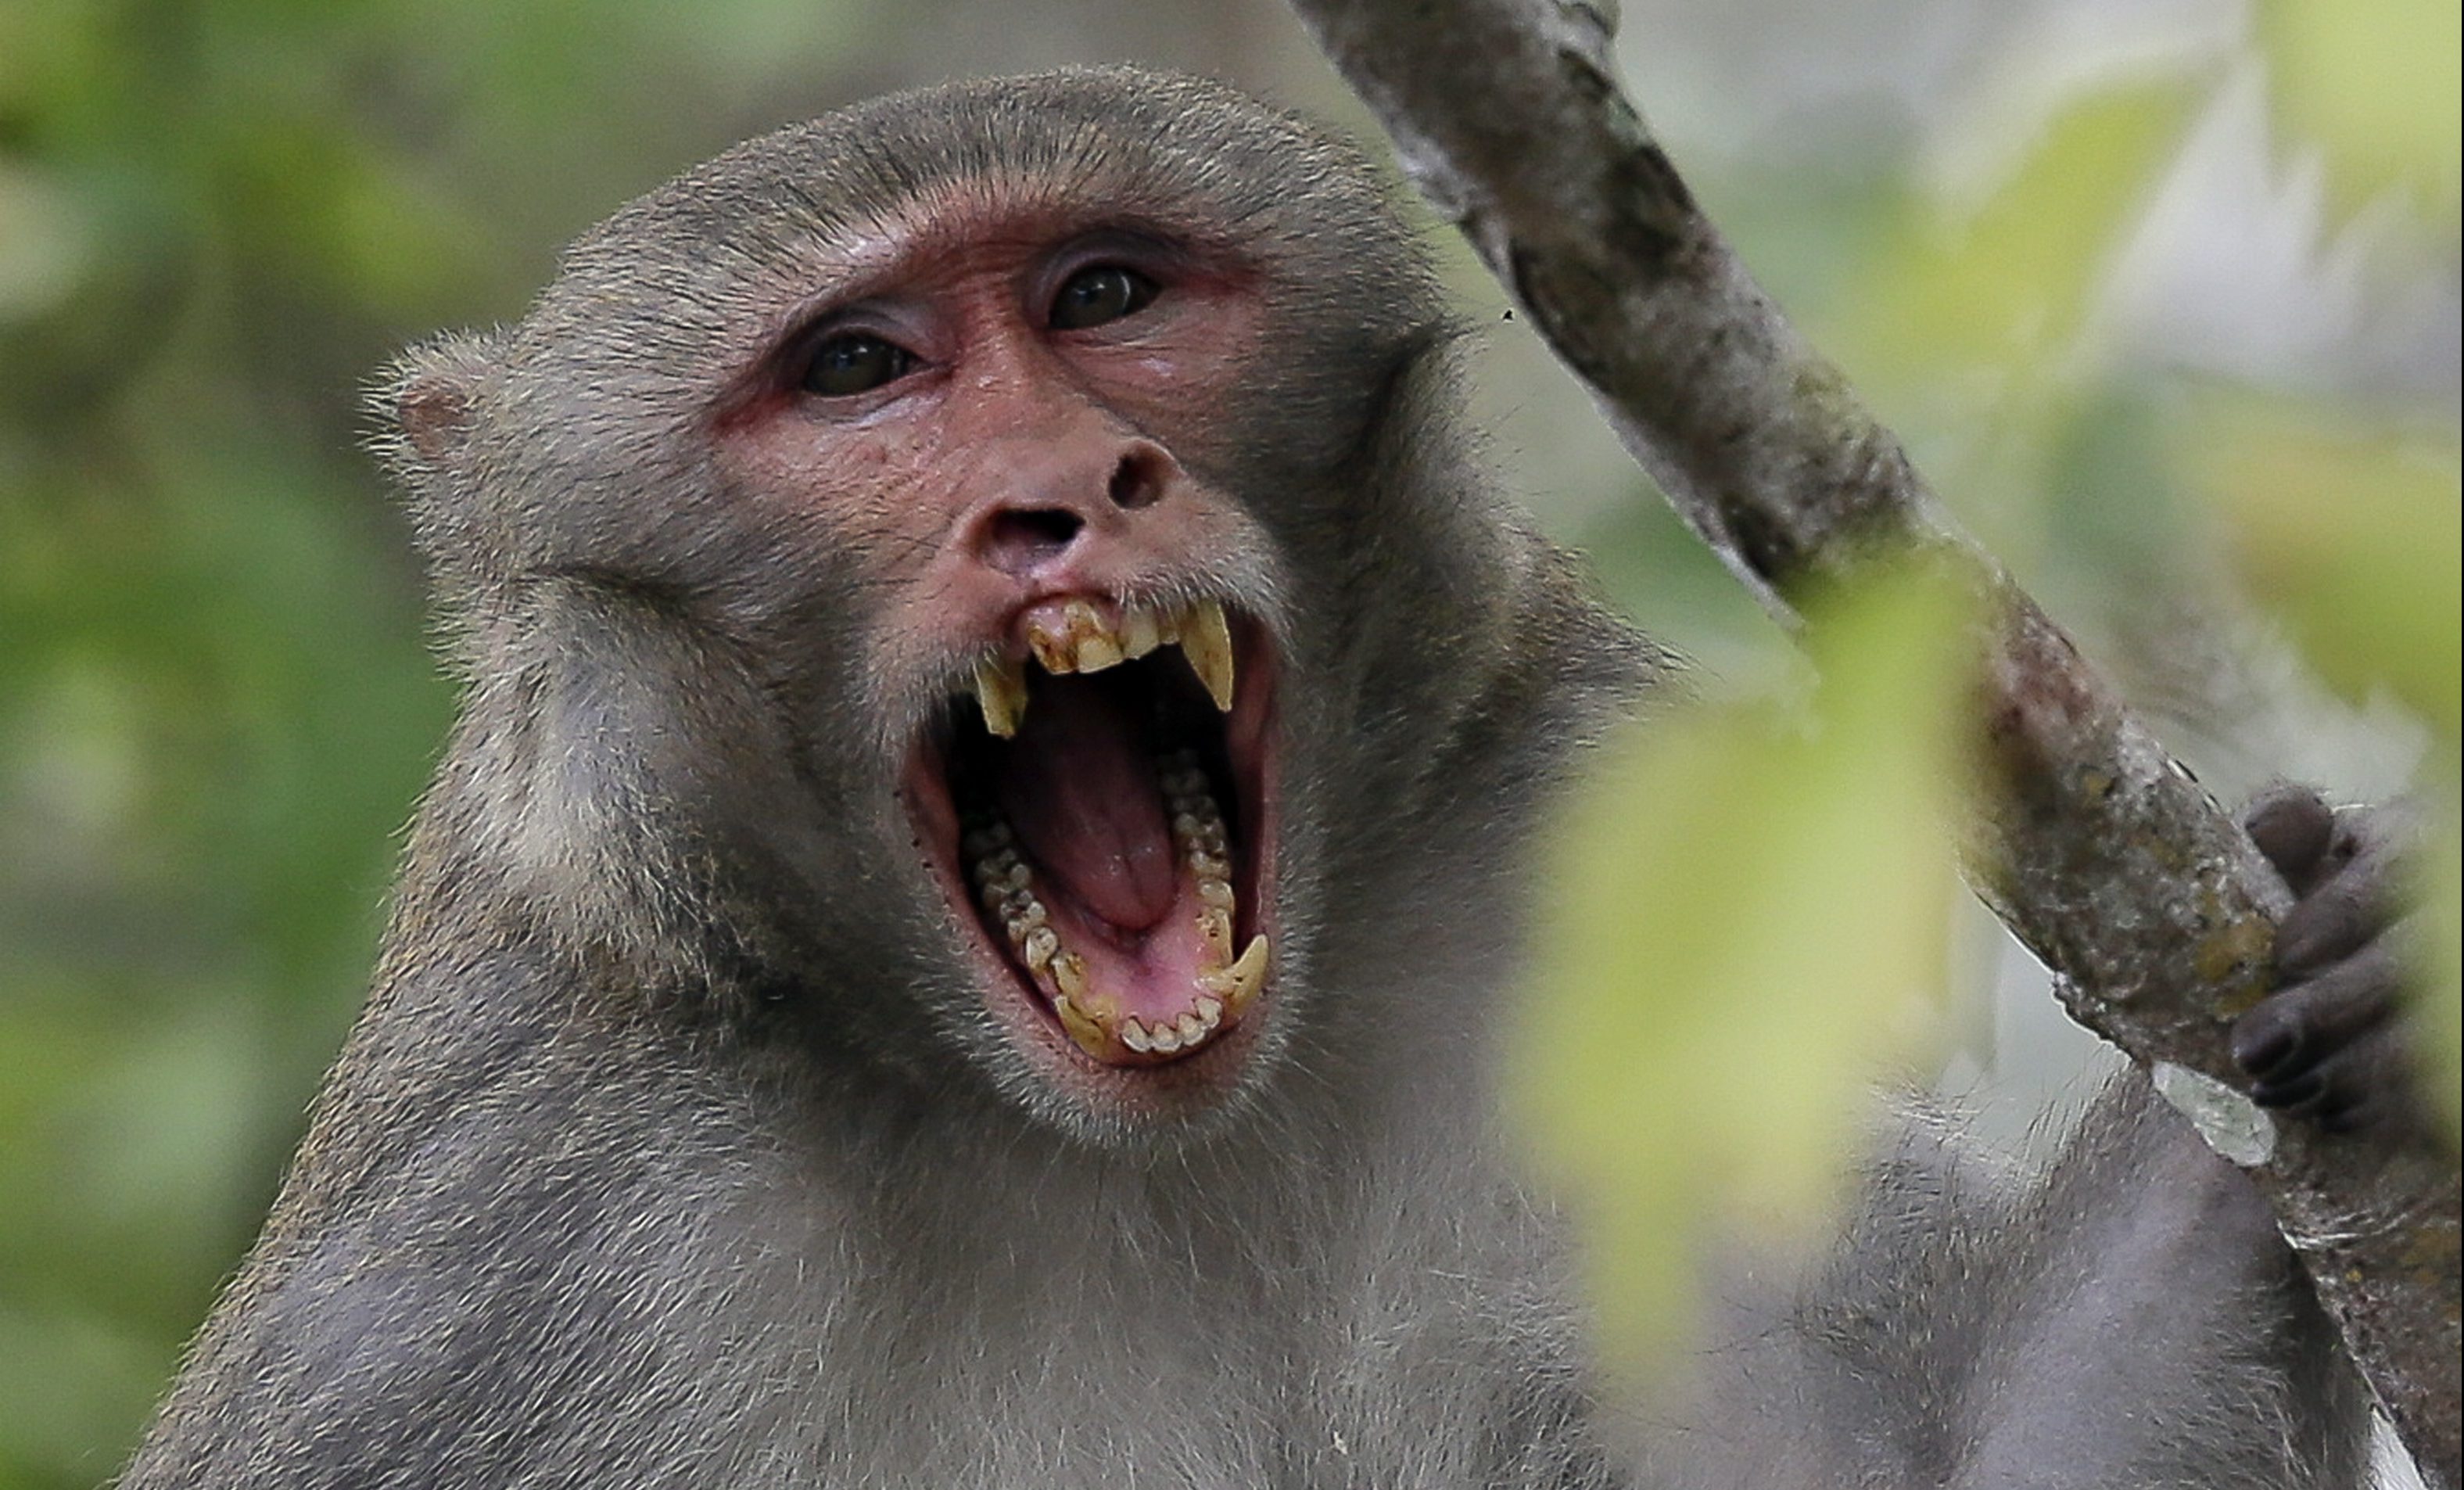 Scientists: Florida monkeys could give herpes to humans